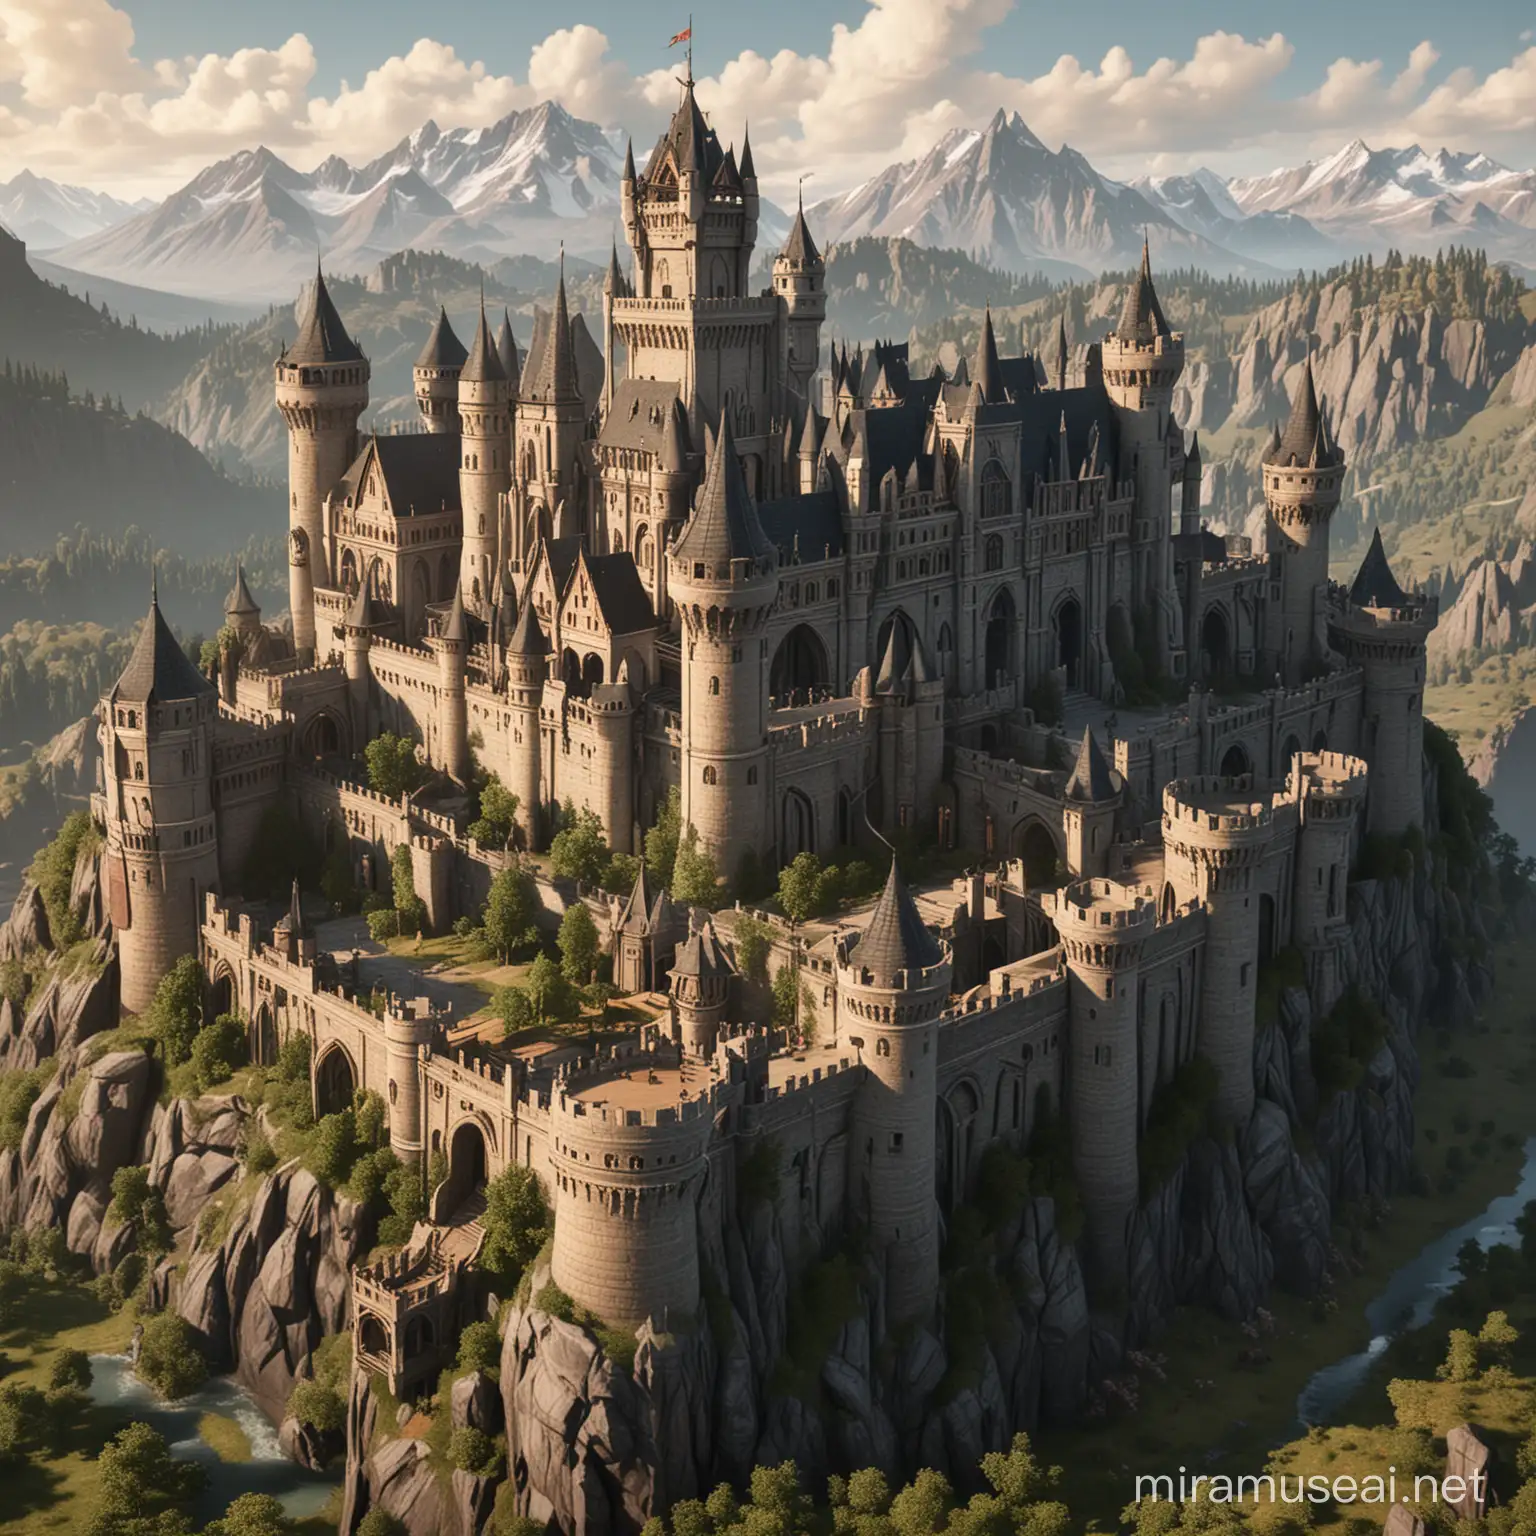 Generated an elven castle based on the dragon age videogames but set in a flourishing timeline. 